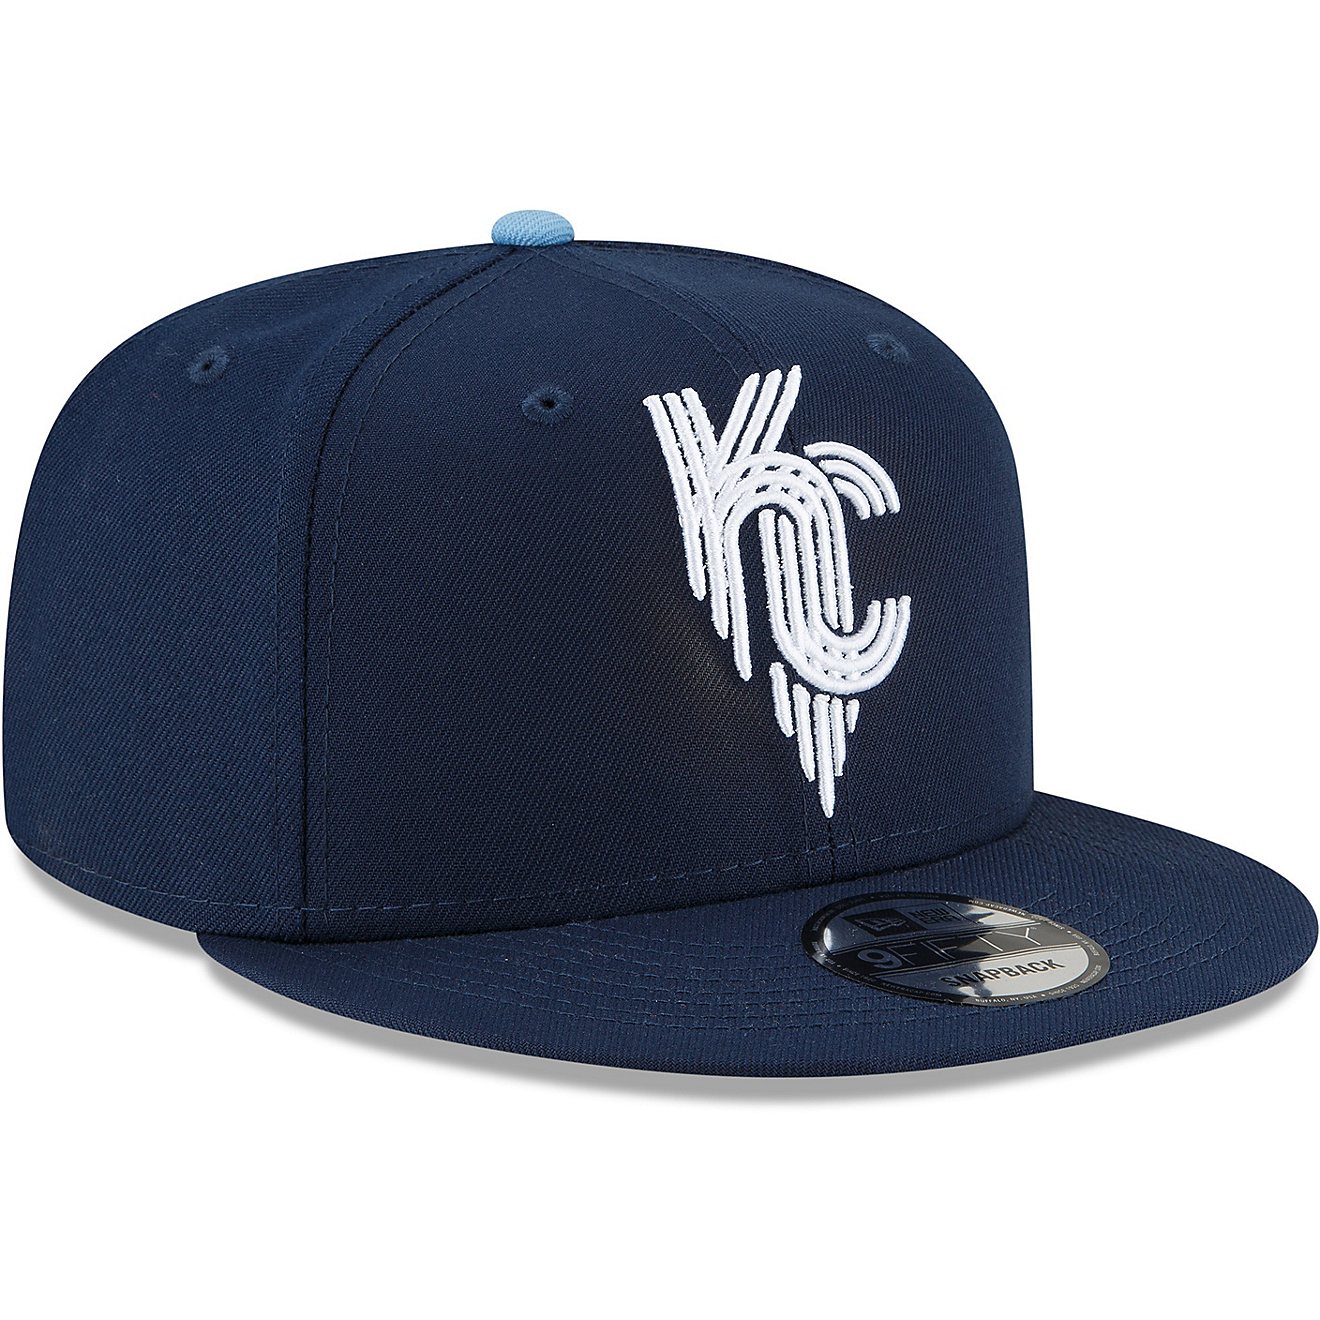 New Era Youth Kansas City Royals City Connect 9FIFTY Cap                                                                         - view number 10